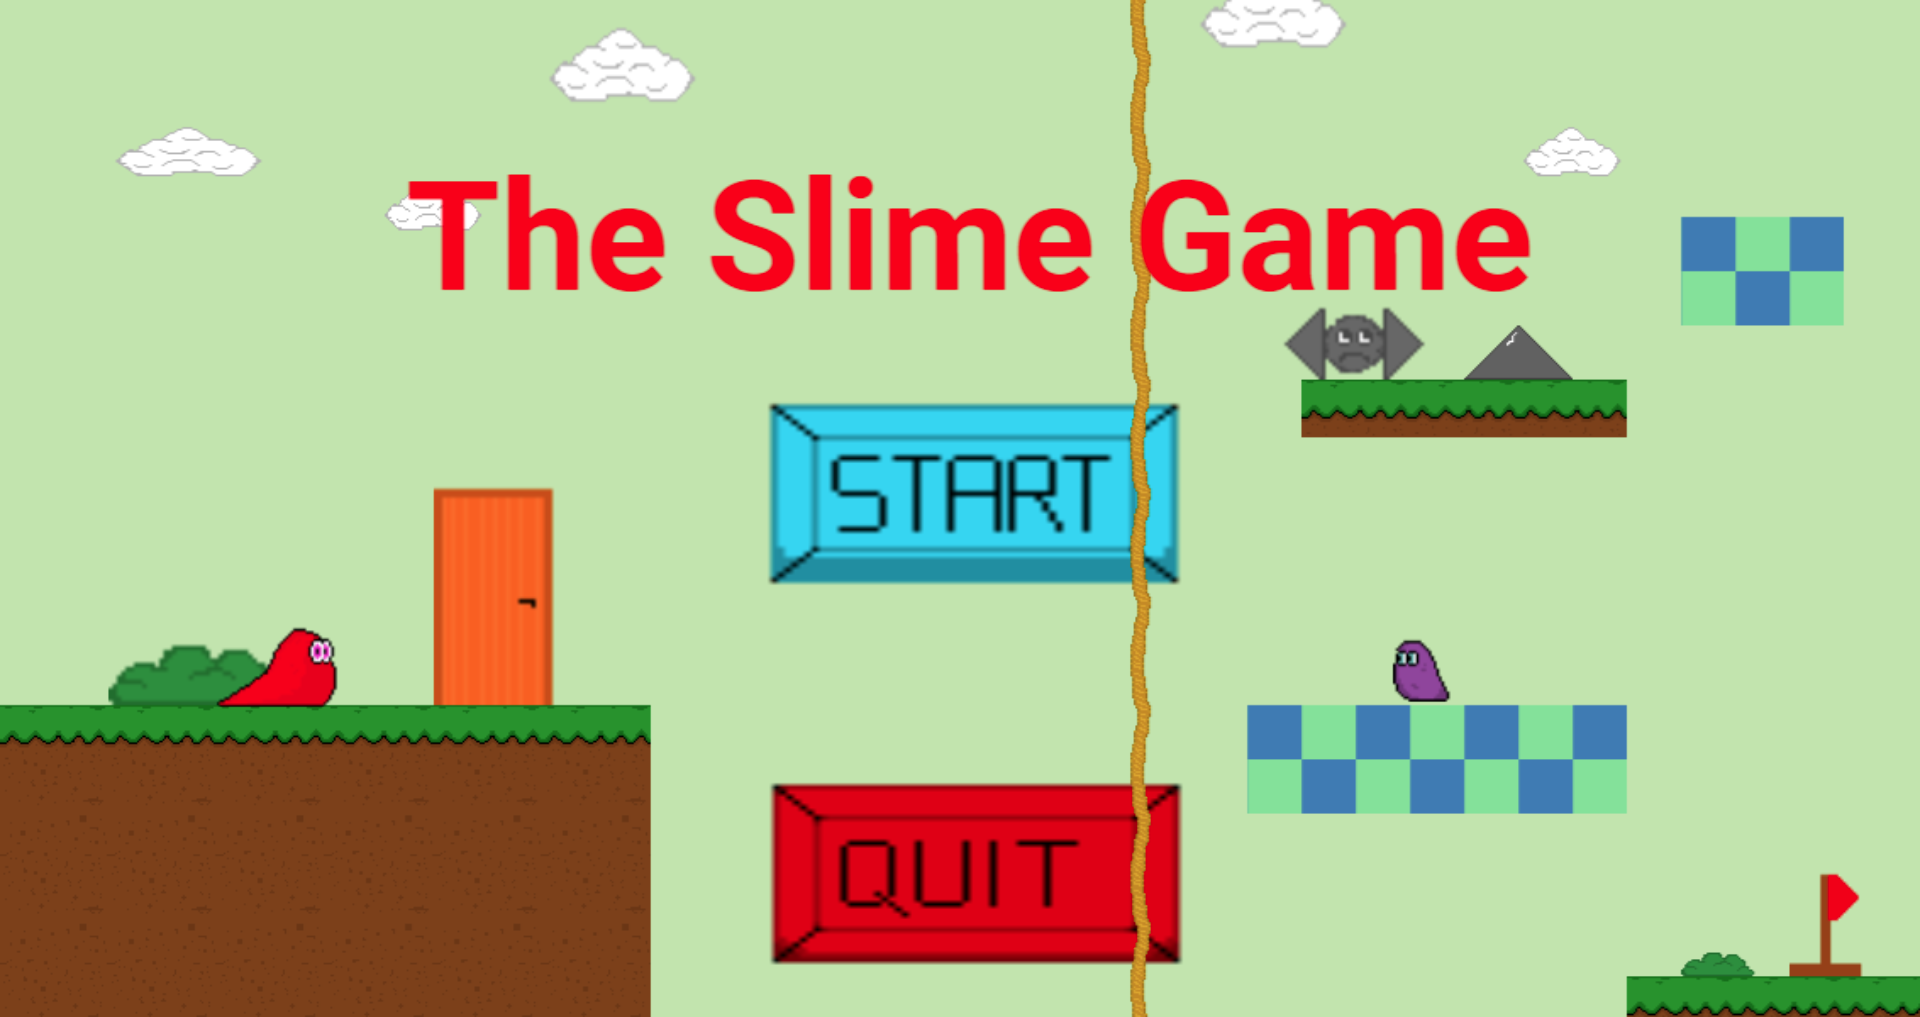 The Slime Game